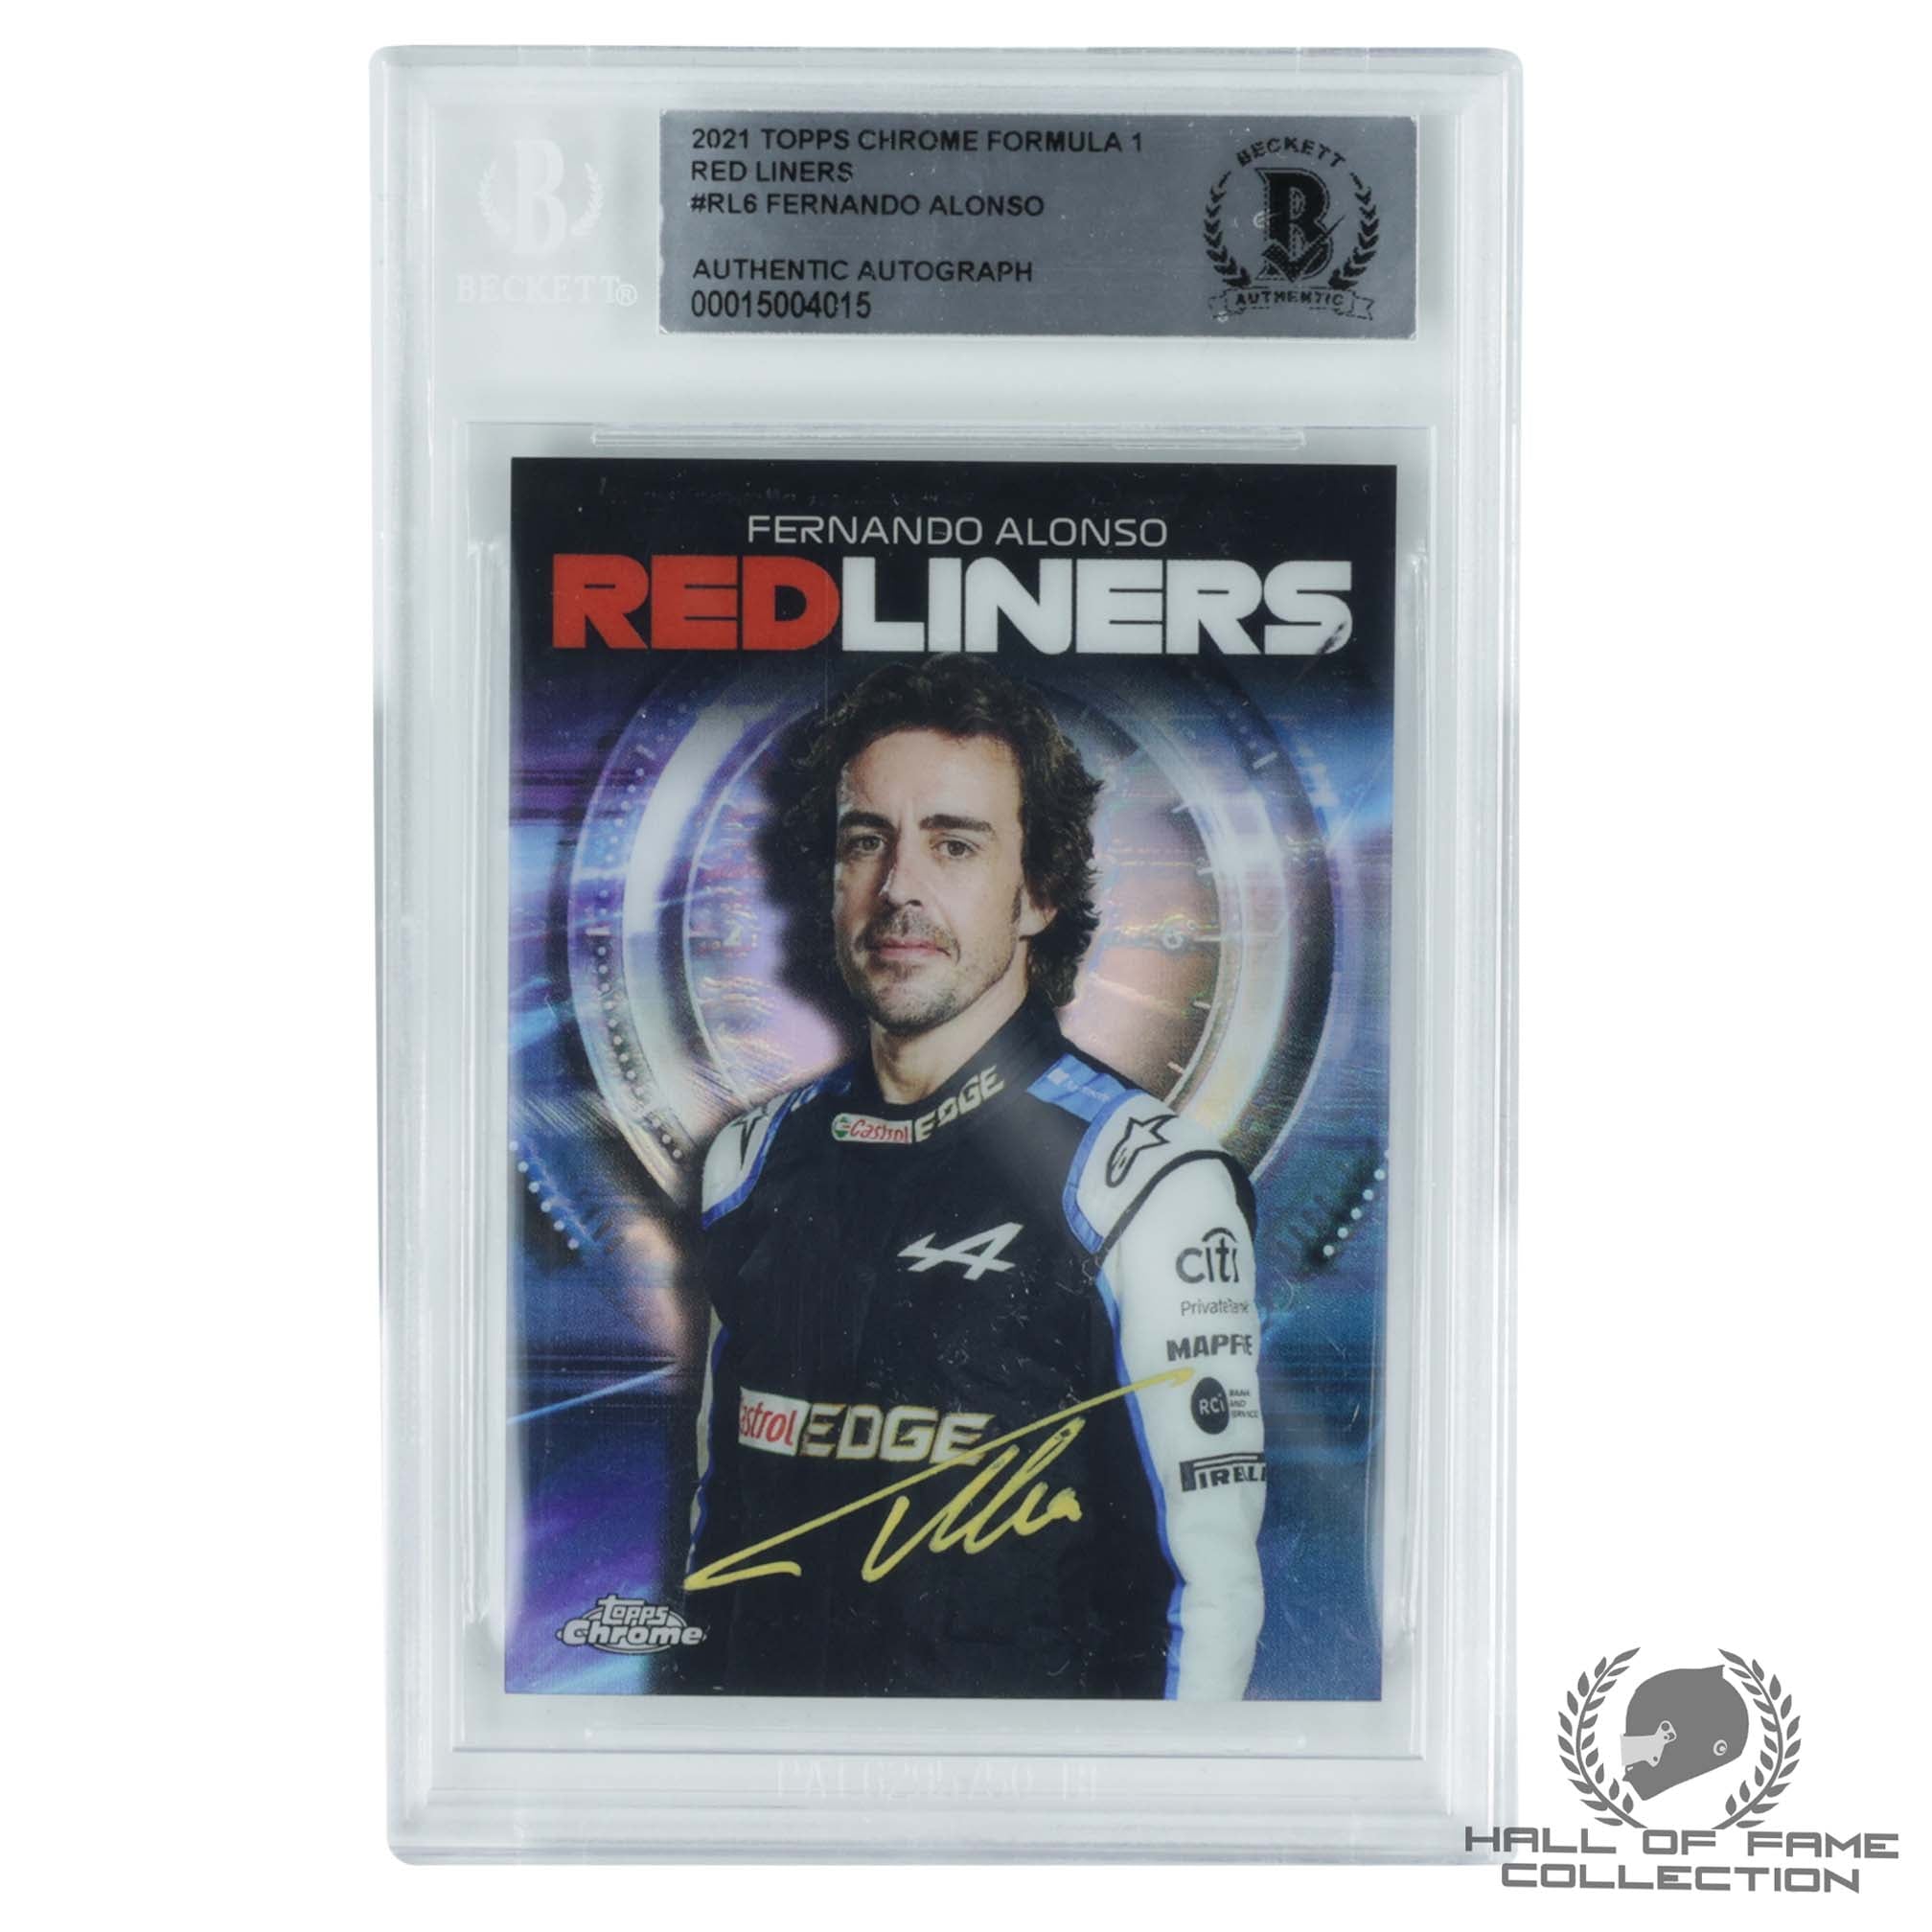 2021 Topps Chrome Formula 1 Red Liners #RL6 Fernando Alonso Authentic Autograph